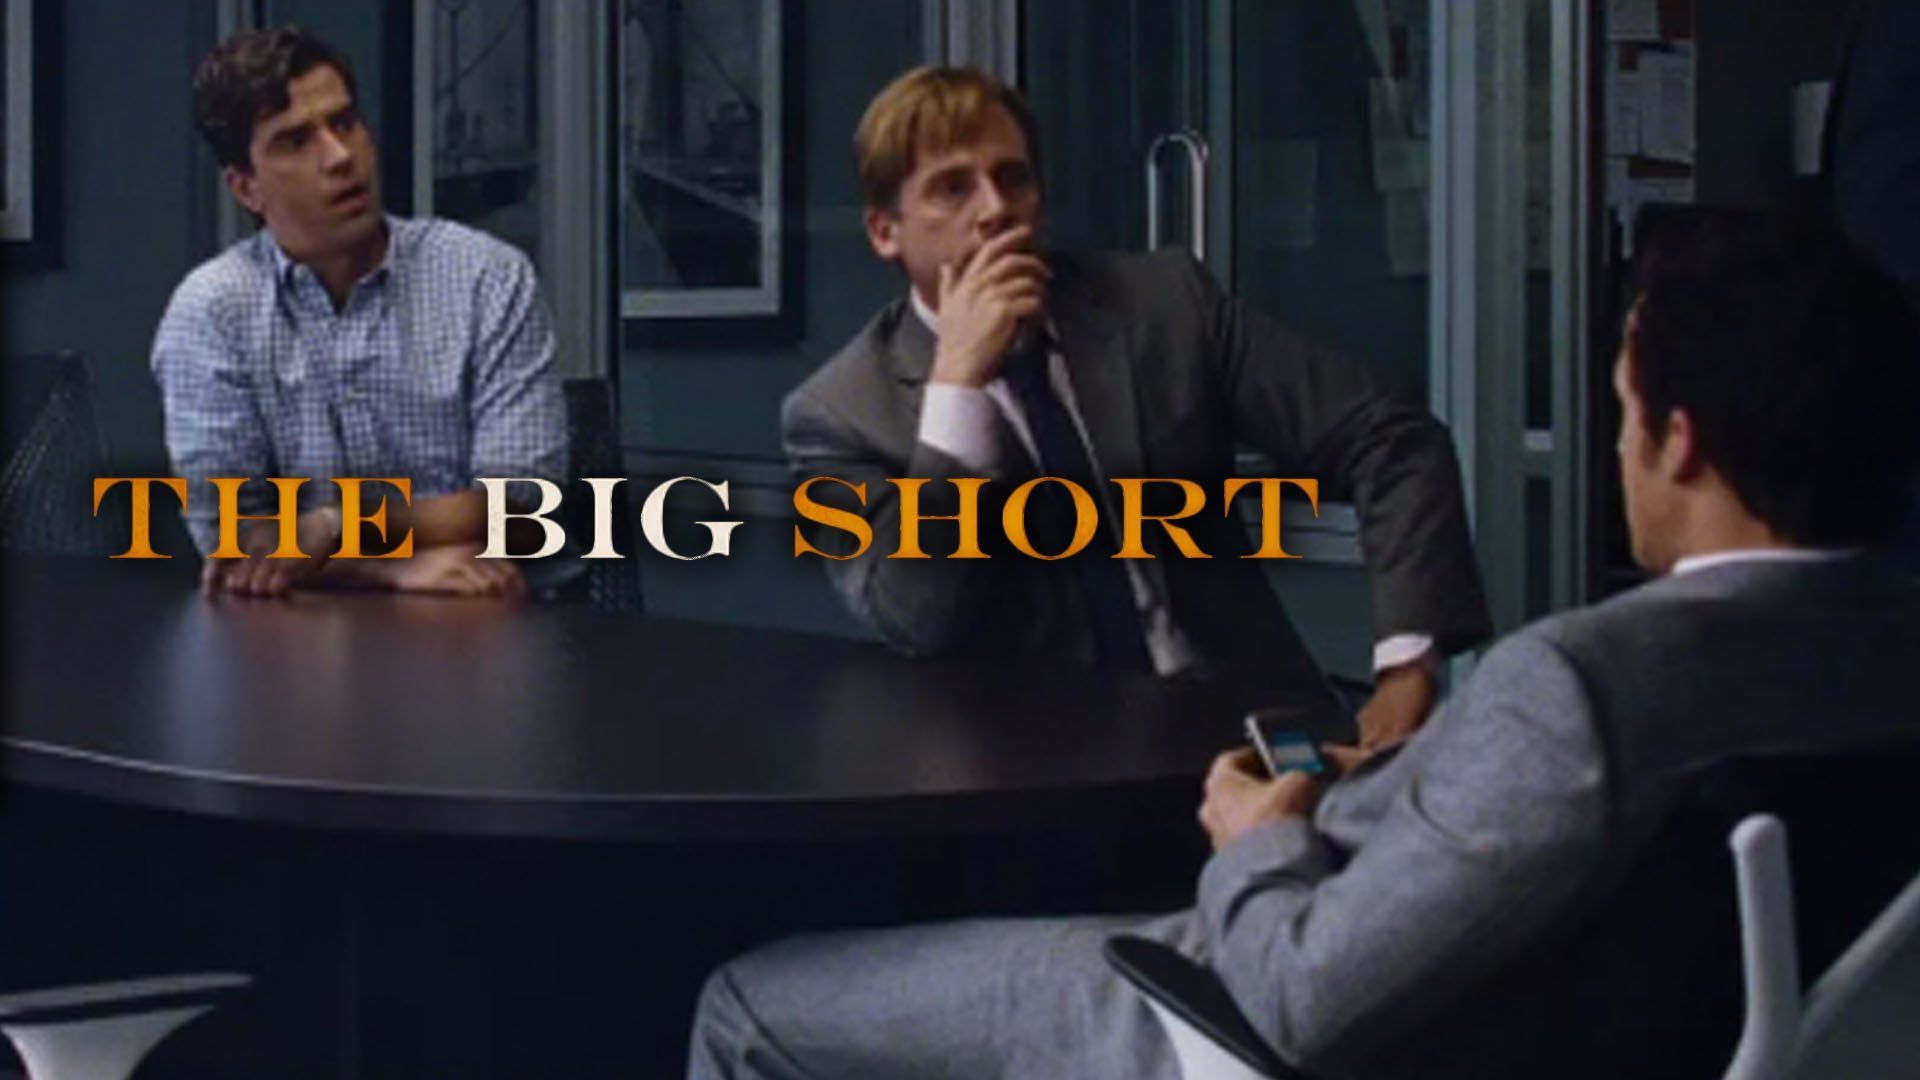 With reference to his new film, The Big Short, which portrays the story of the housing market collapse of 2008. The big short, Good comedy movies, Christian bale